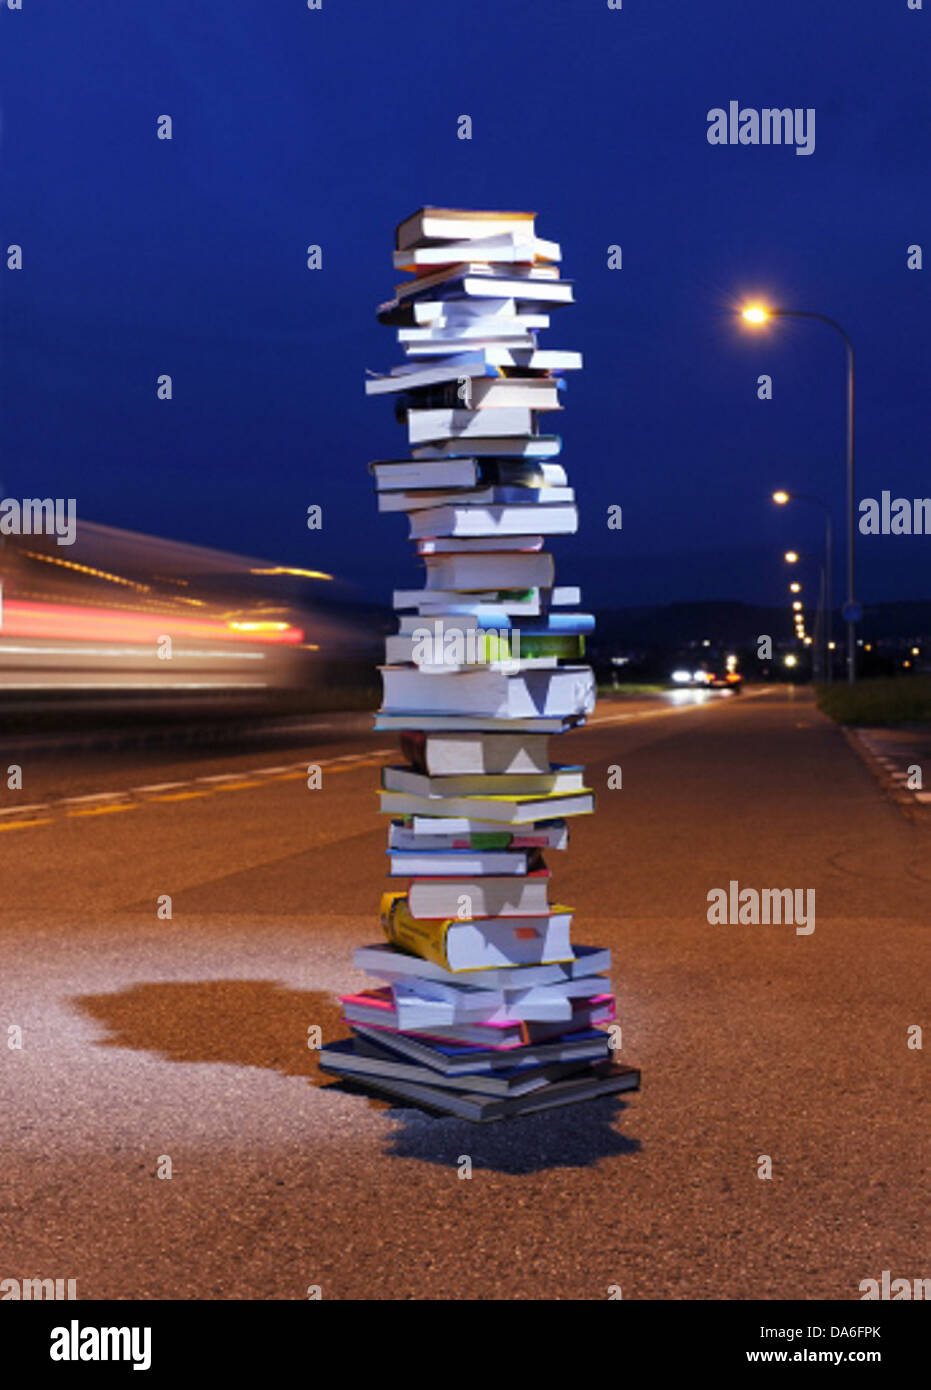 Continuing education, book, books, pile, street, traffic, at night, paper, education, concepts, at night, read Stock Photo